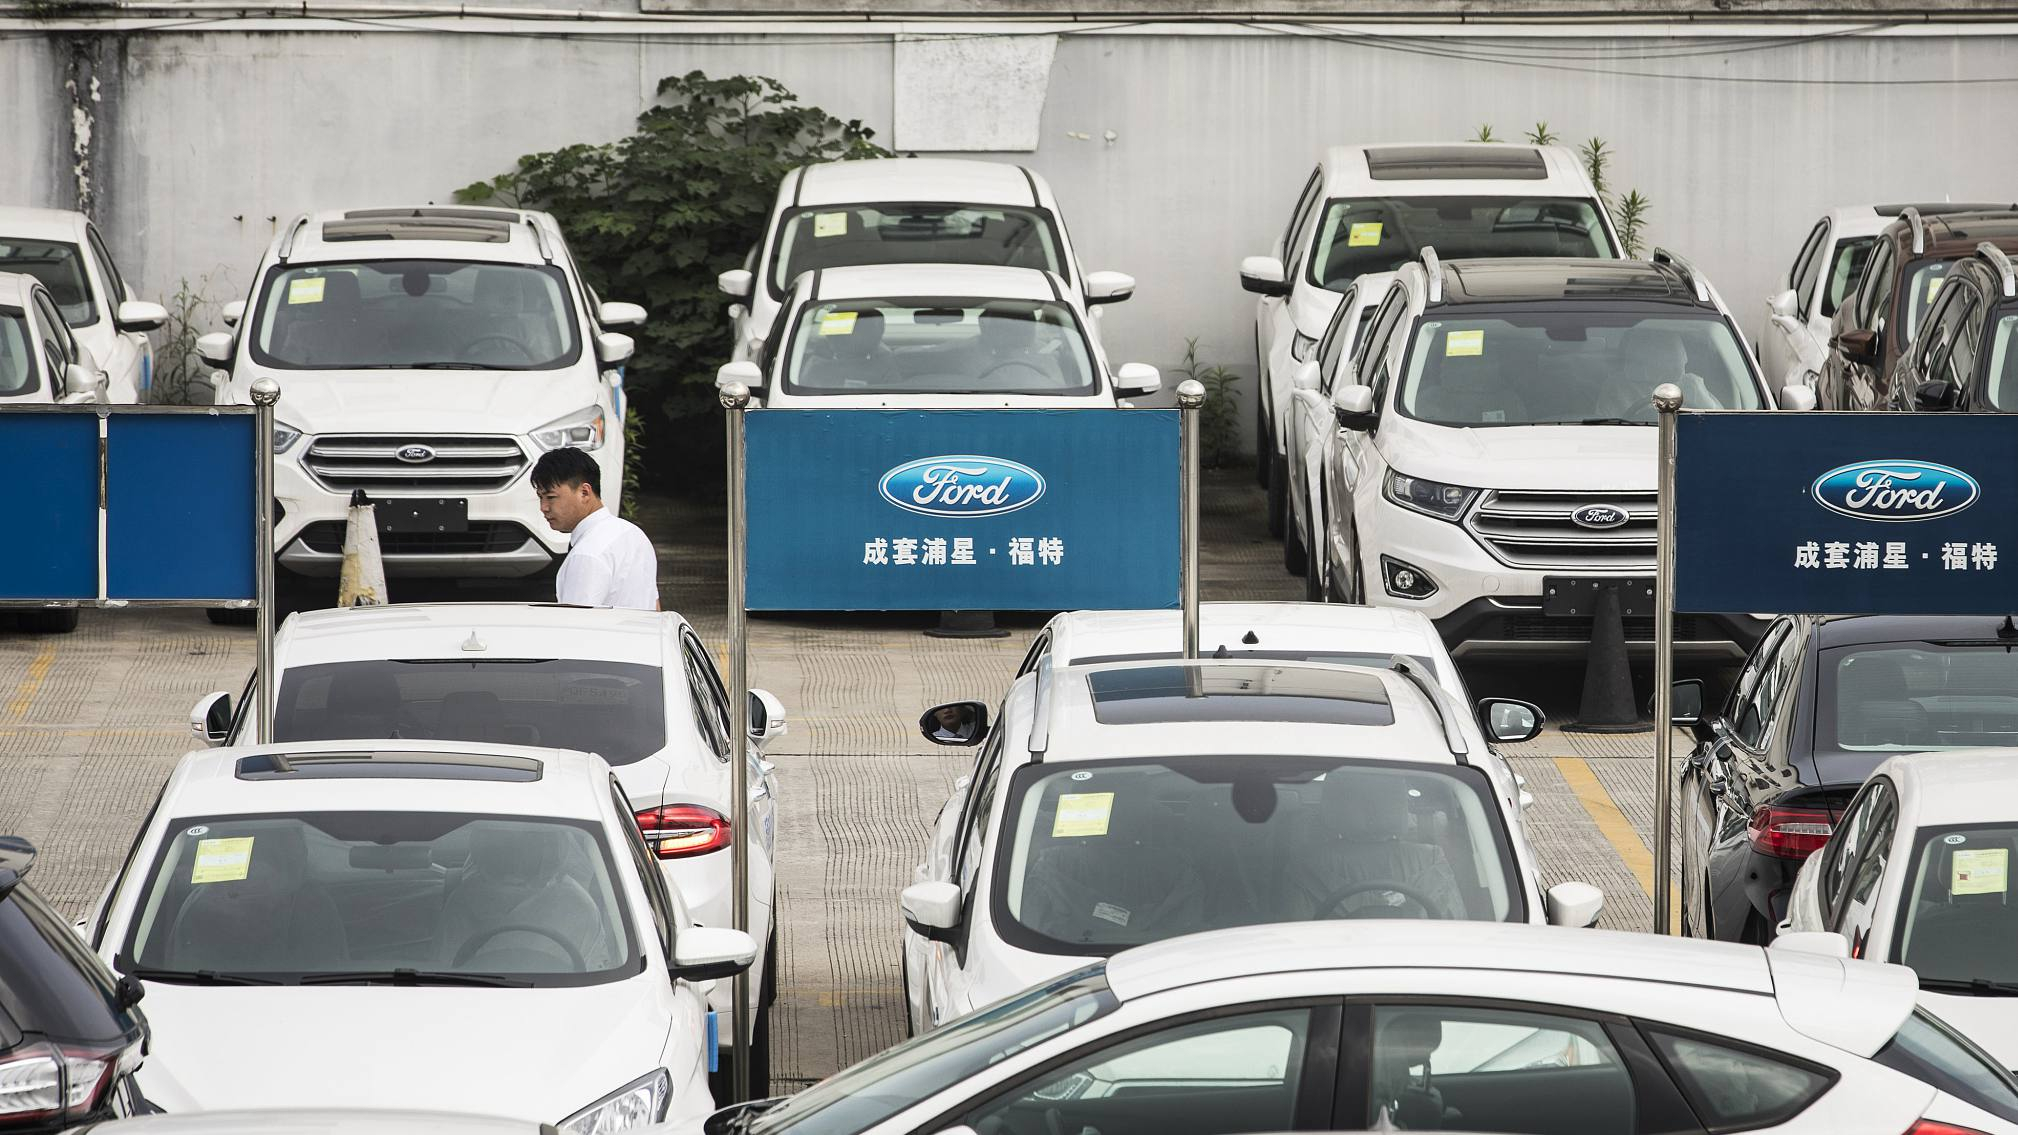 Ford Motor Co. vehicles on display at a car dealership in Shanghai, July 8, 2018.[Photo: IC]